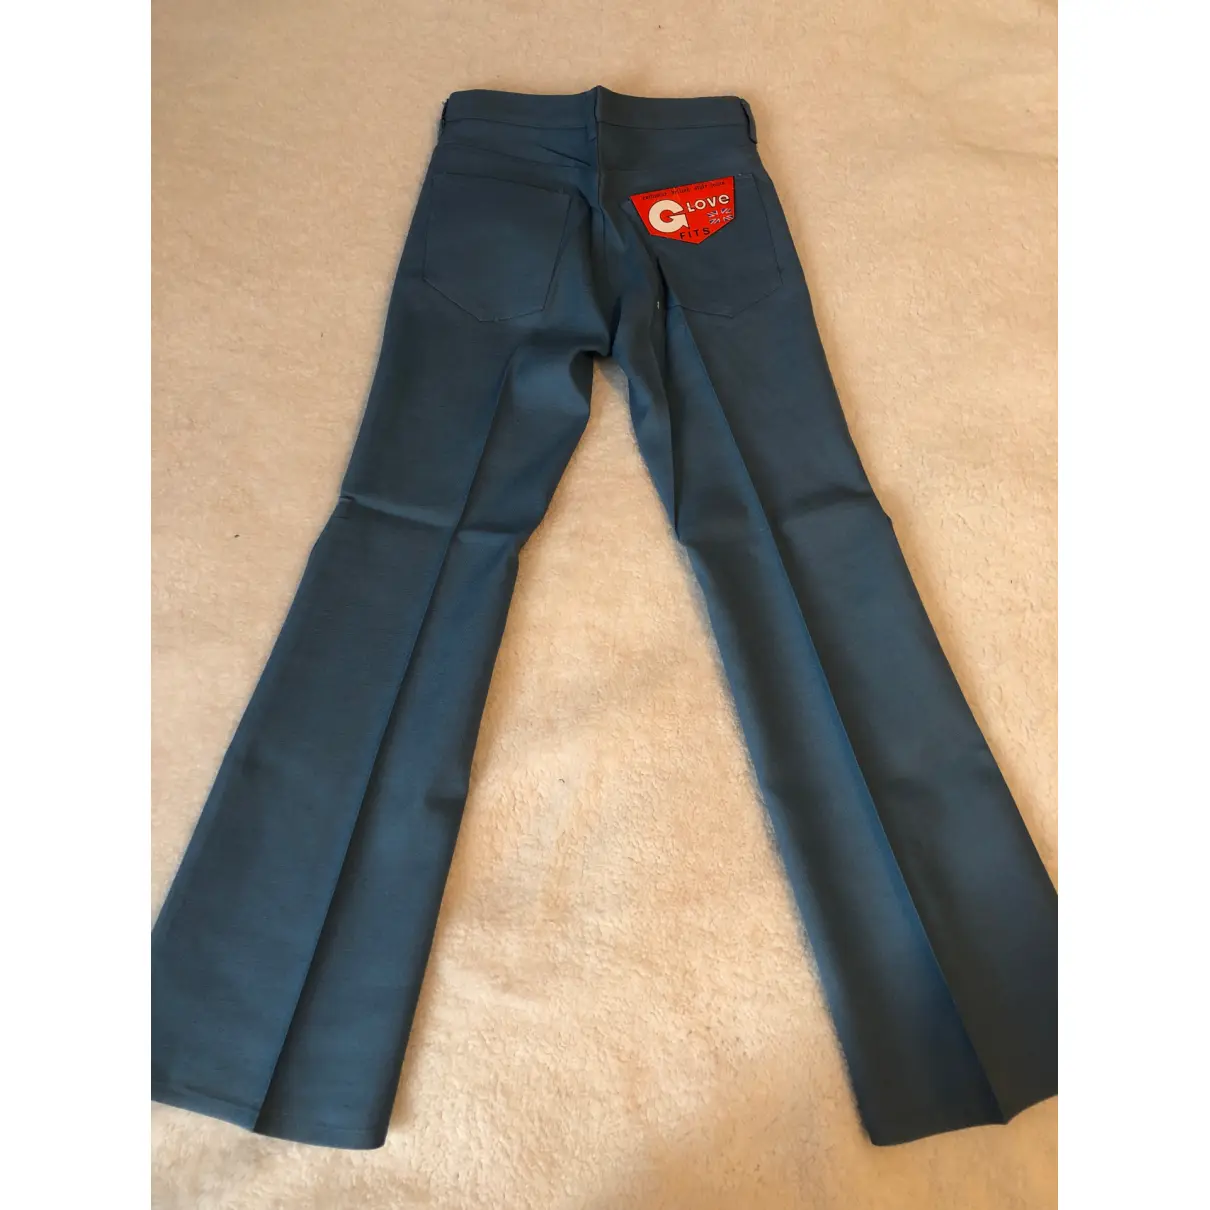 Buy Glove Trousers online